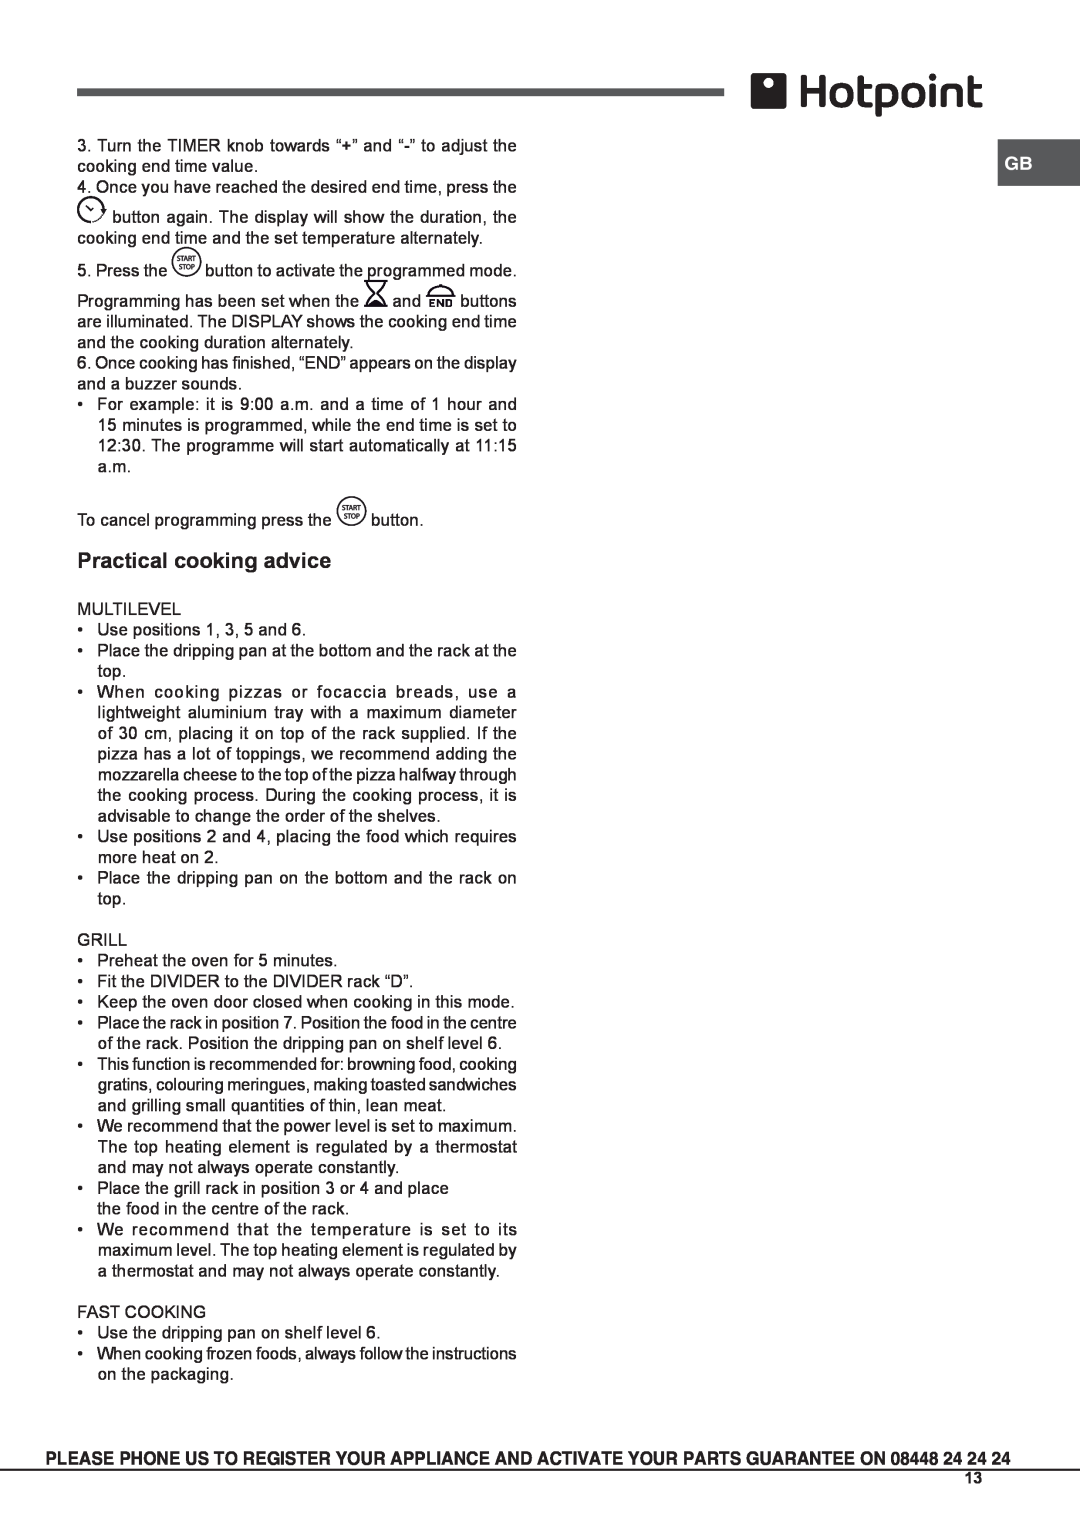 Hotpoint OSHS89EDC manual Practical cooking advice 